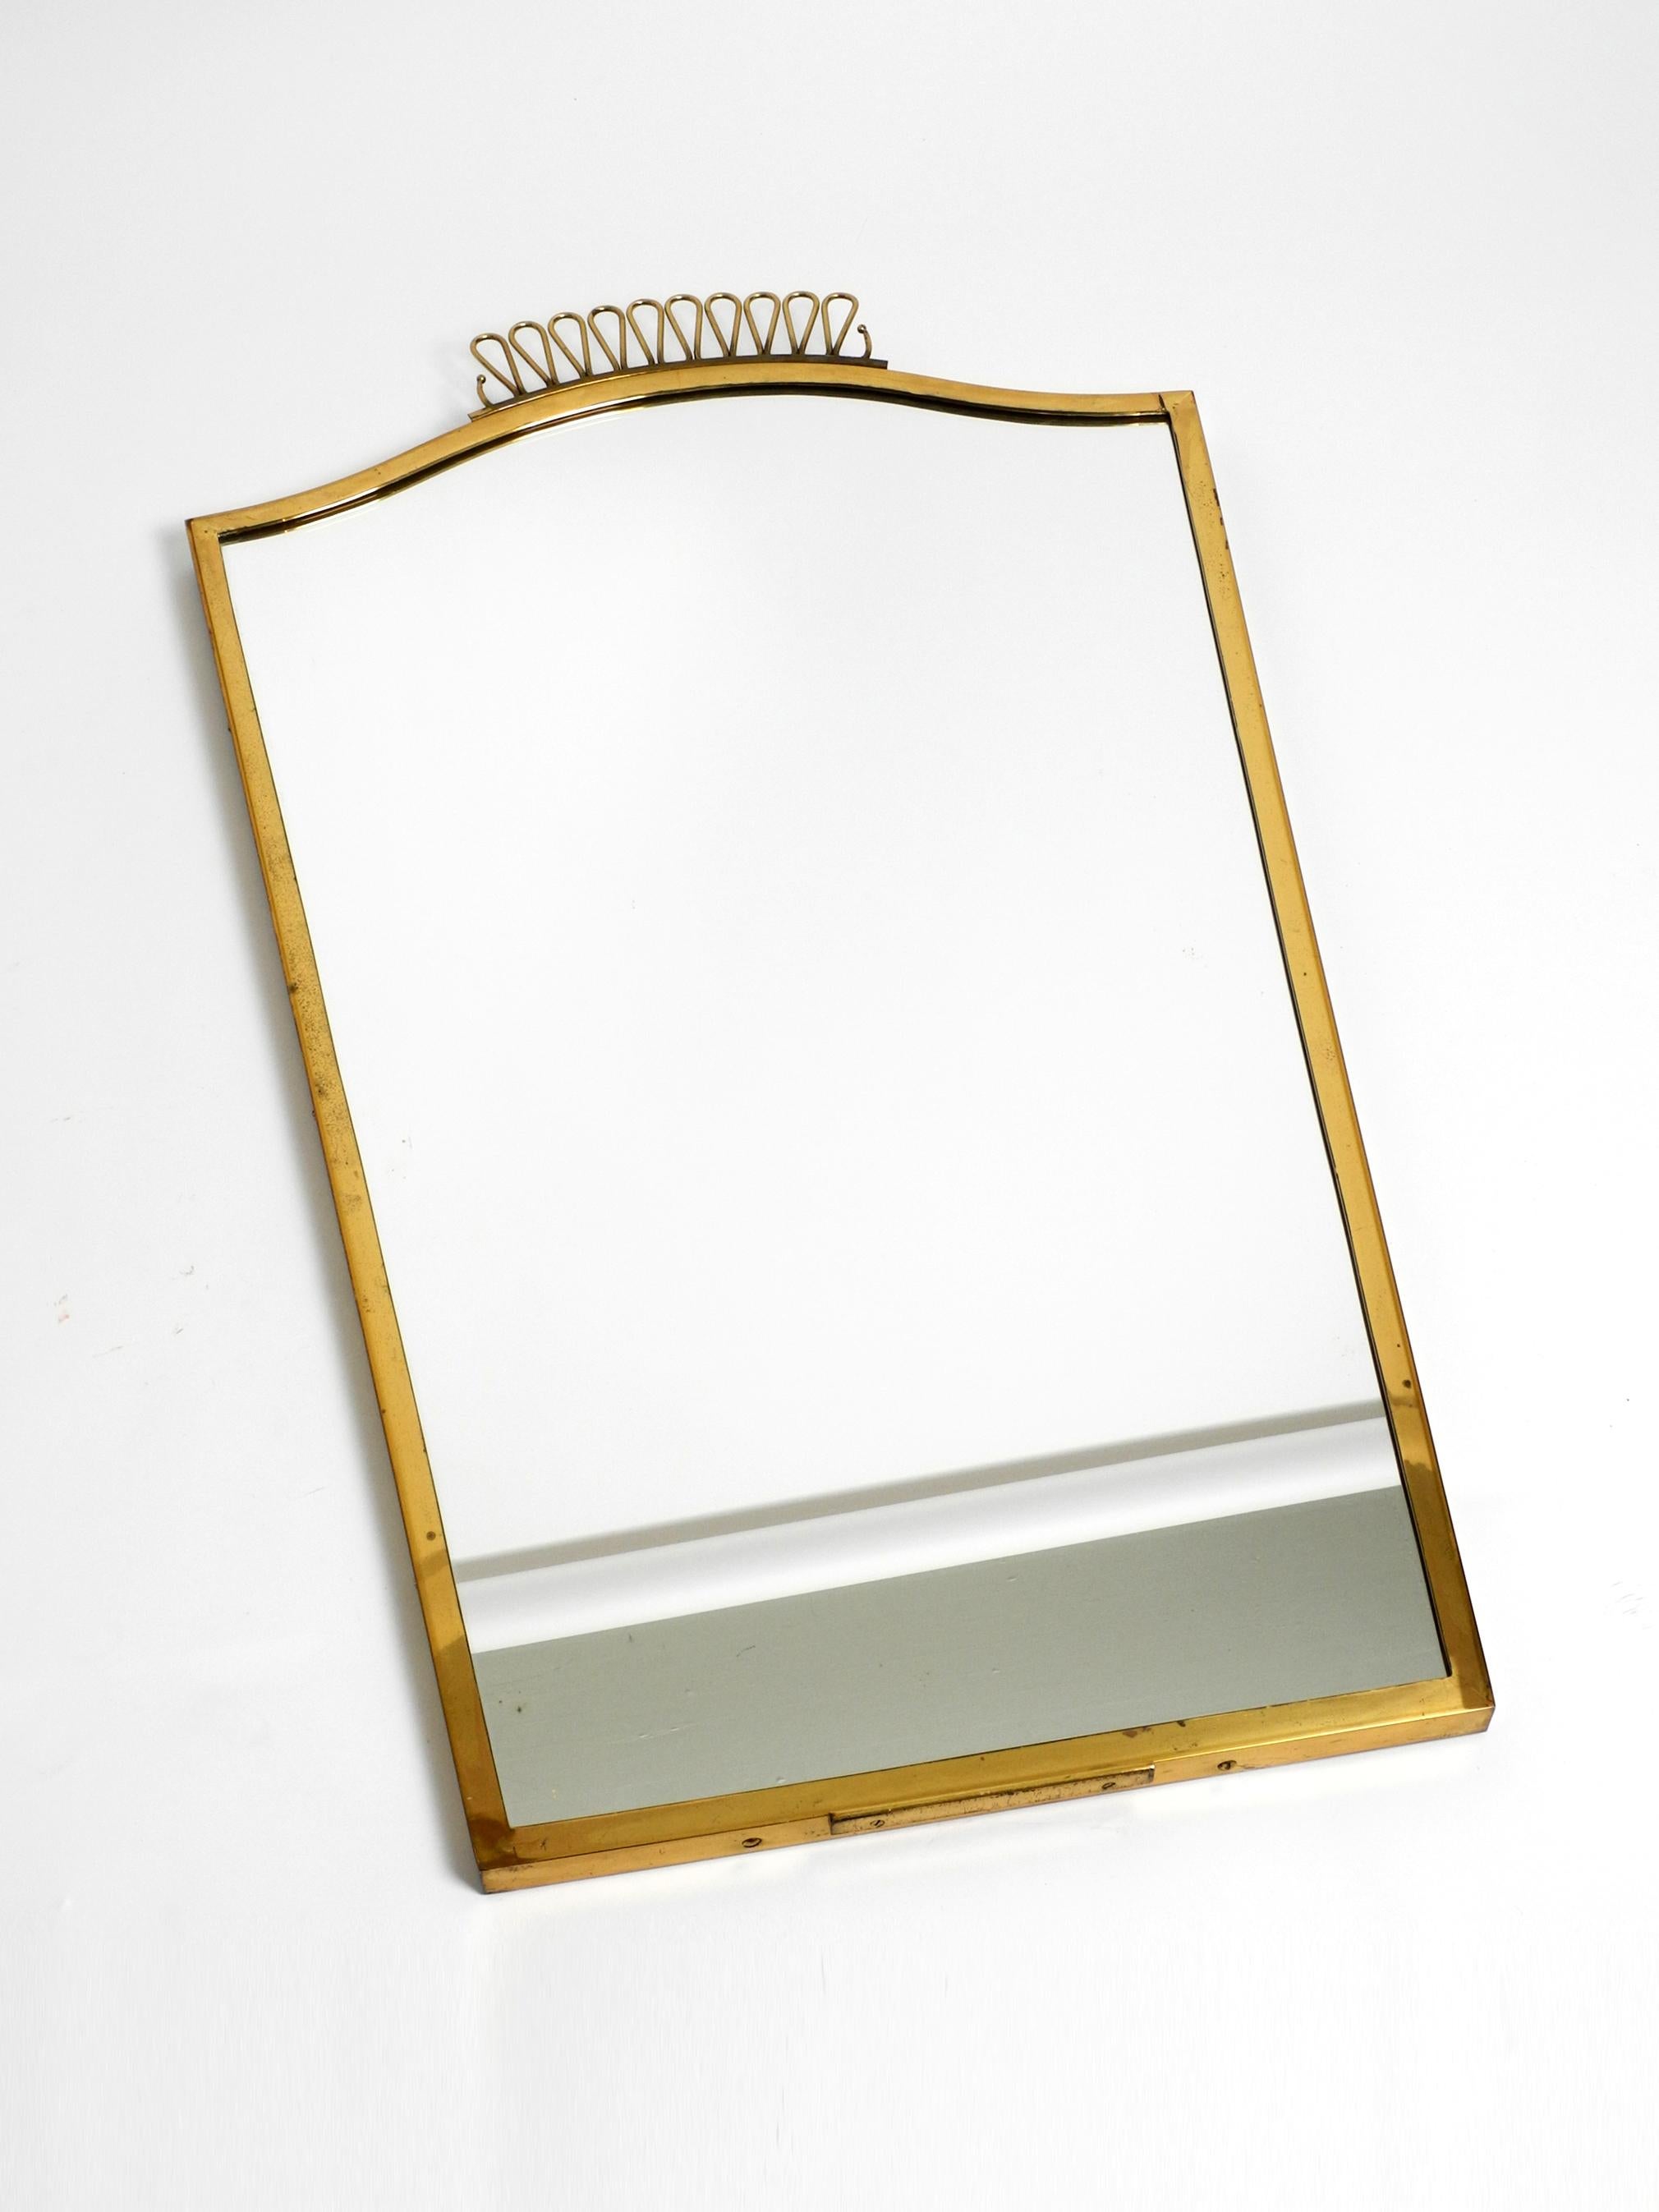 Extraordinary, rare, large, elegant Mid Century brass wall mirror.
Great 1960s design. Very high quality, solid and elegantly processed.
With thick solid brass frame.
Heavy and very solidly built. Weight about 10 kg.
Very good condition with no